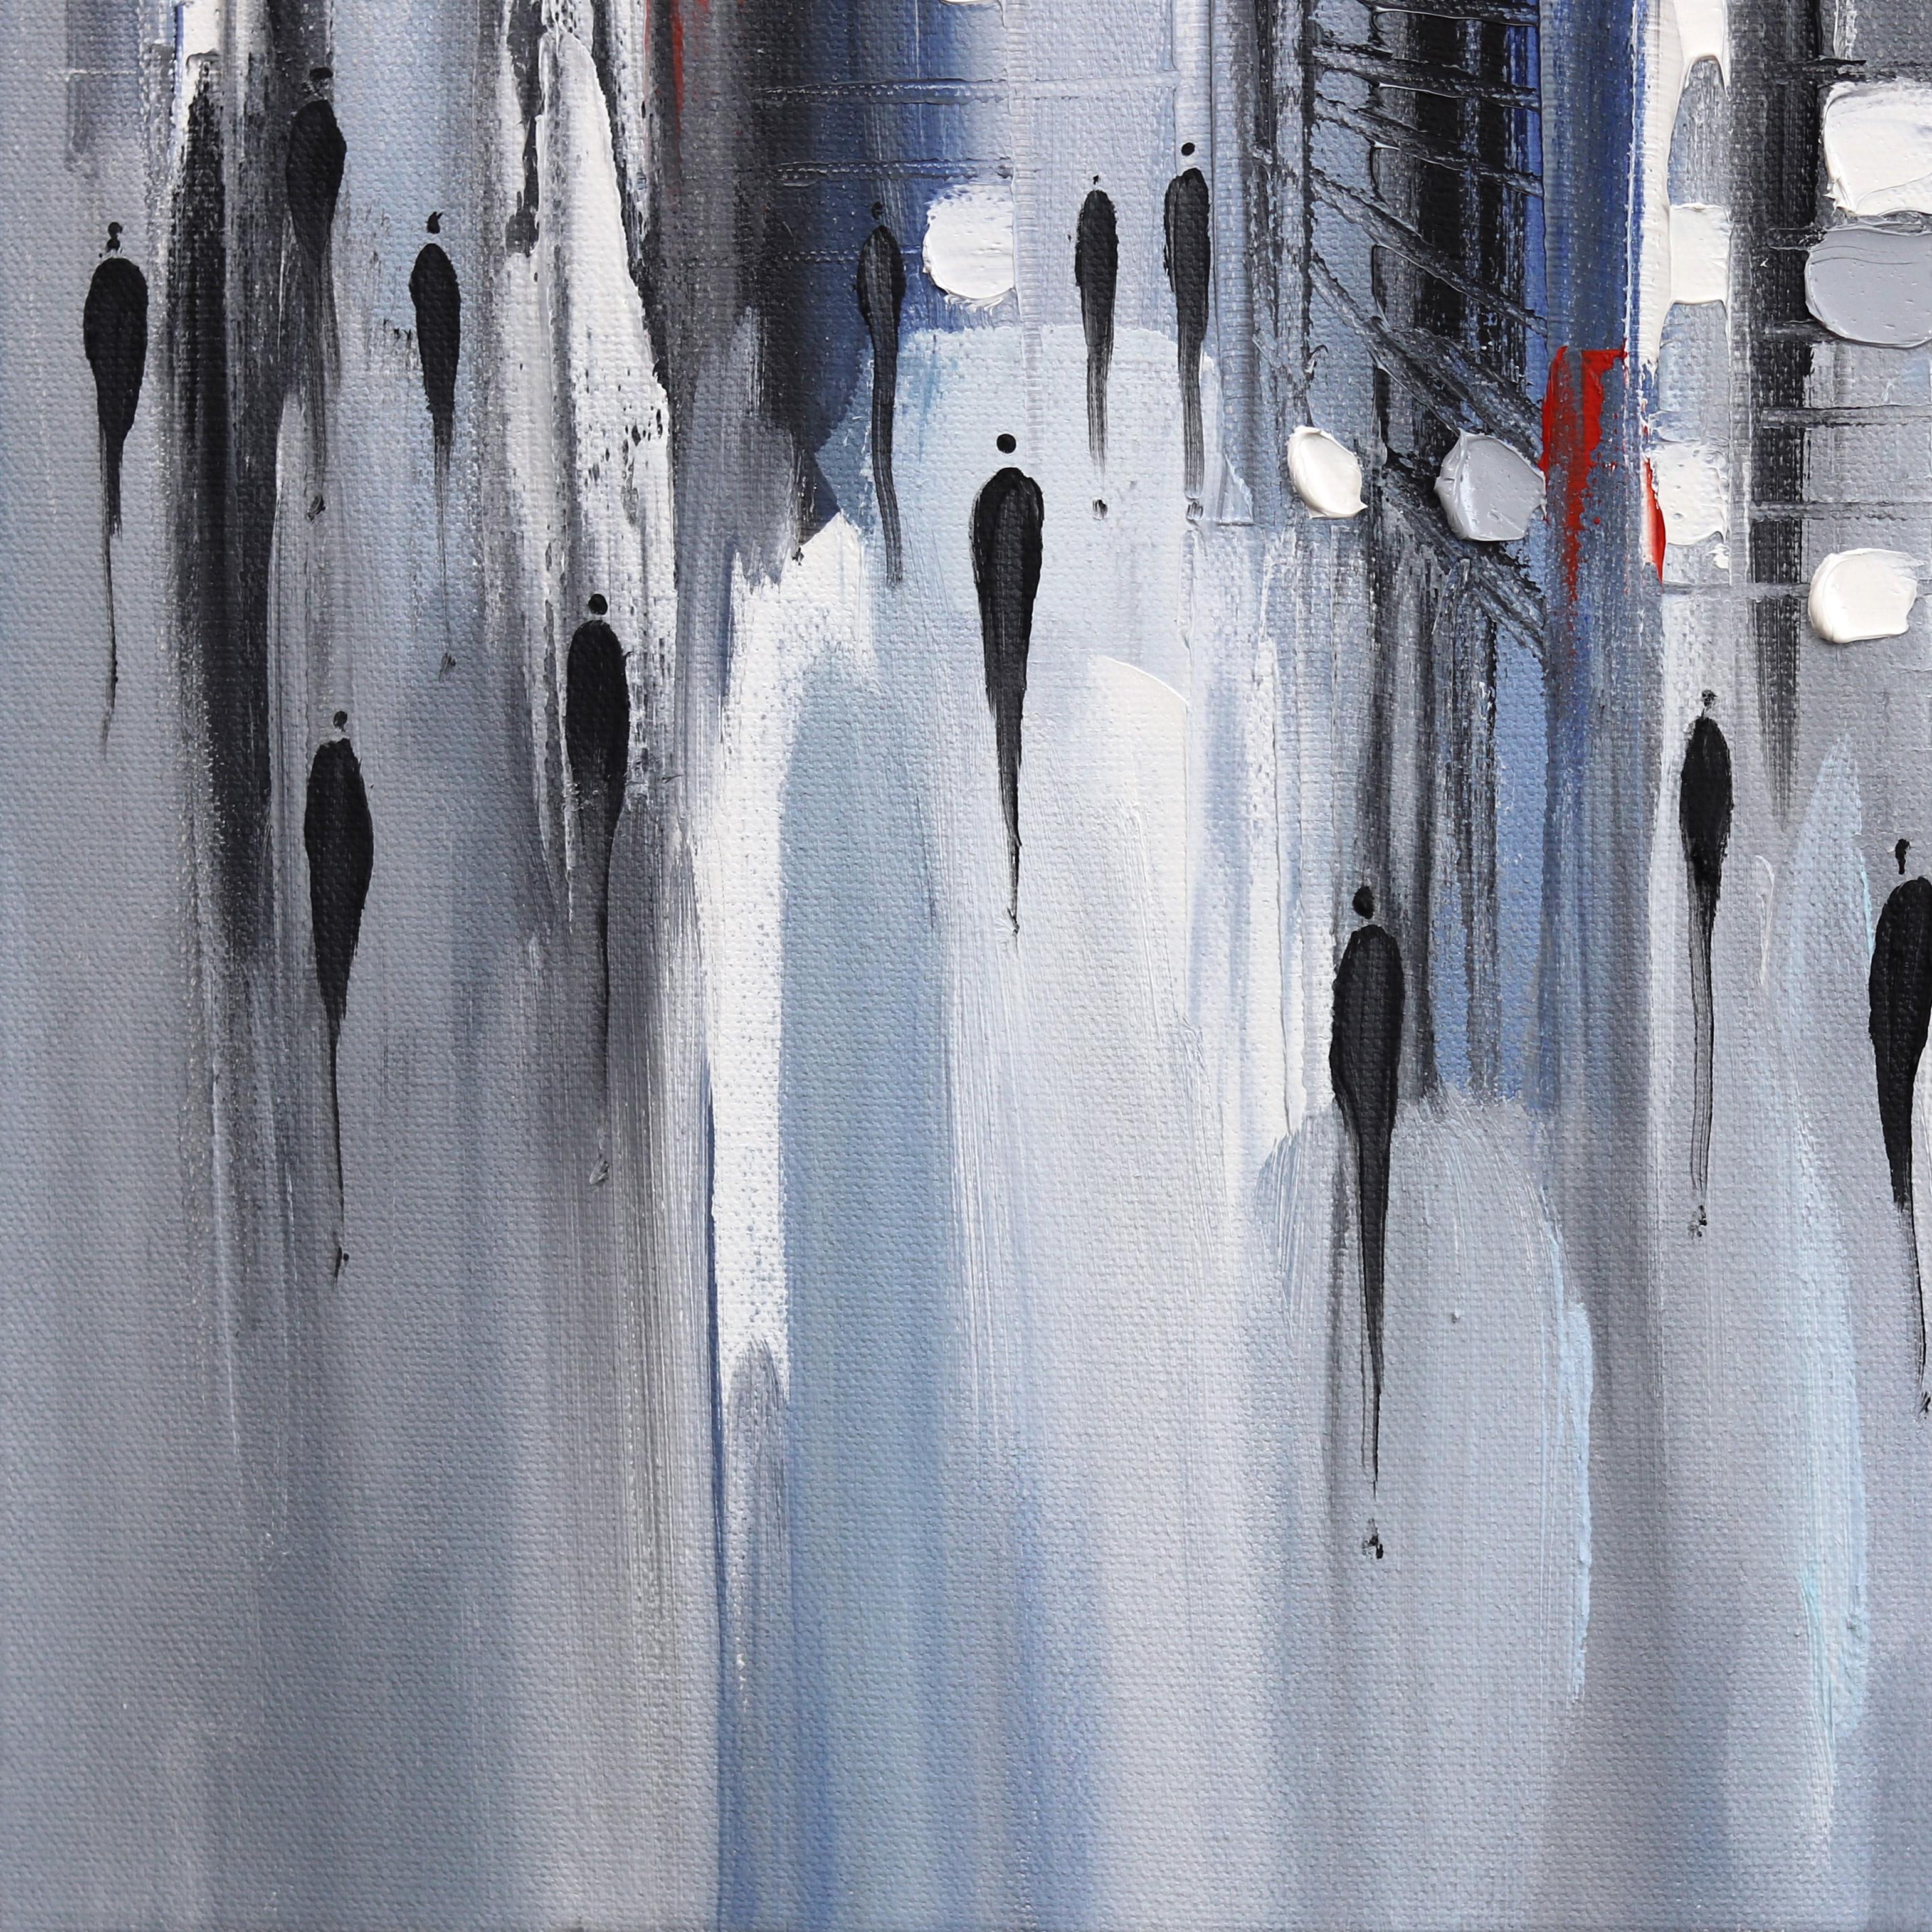 Jam City - Original Abstract Landscape Oil Painting Cityscape on Canvas For Sale 4